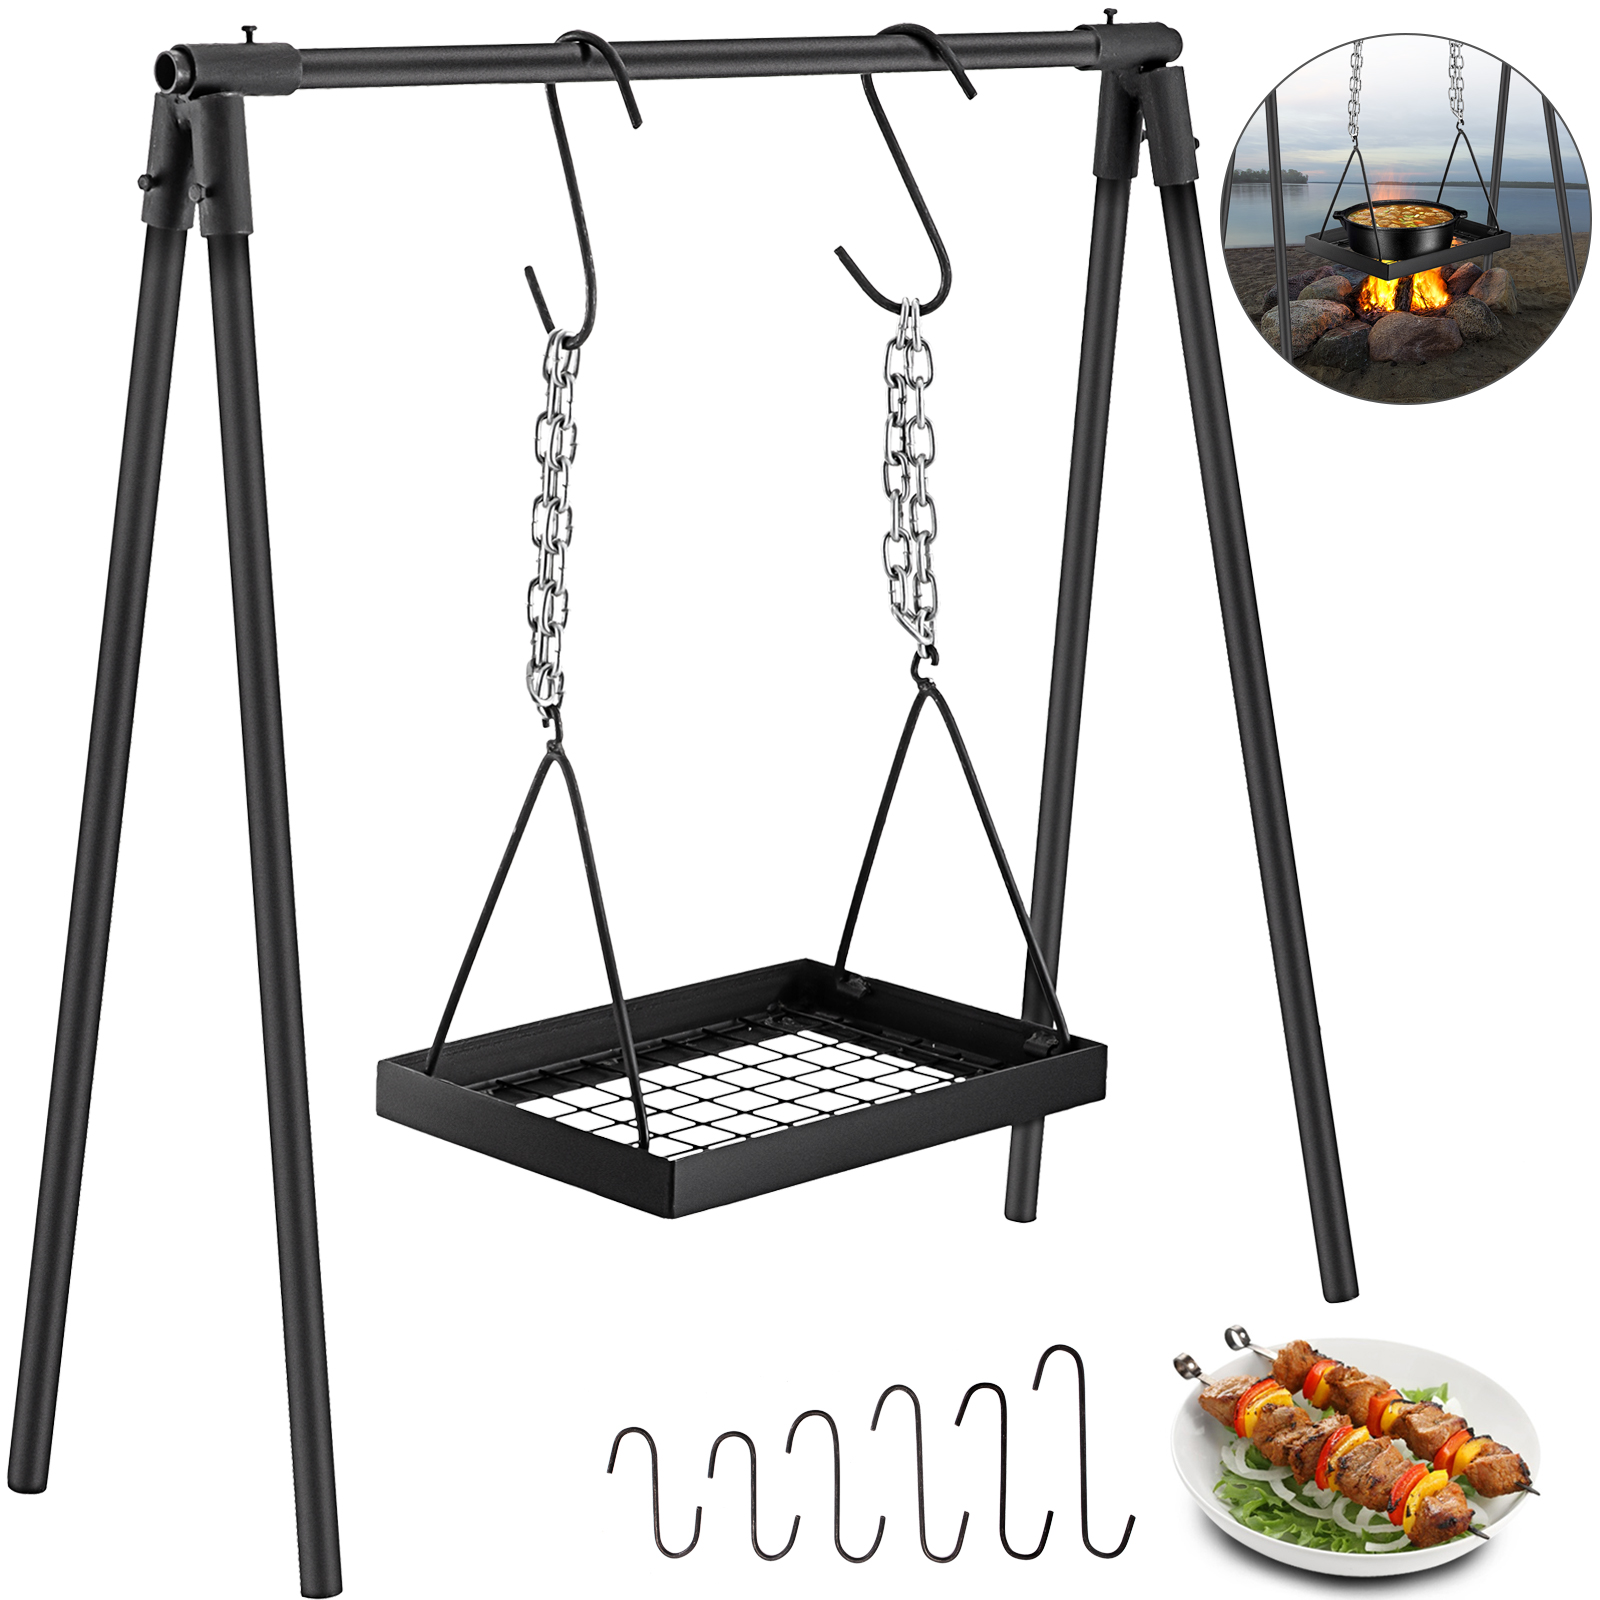 Campfire Cooking Stand, Outdoor Cooking, Cabon Steel, Campfire Cooking Equipment от Vevor Many GEOs